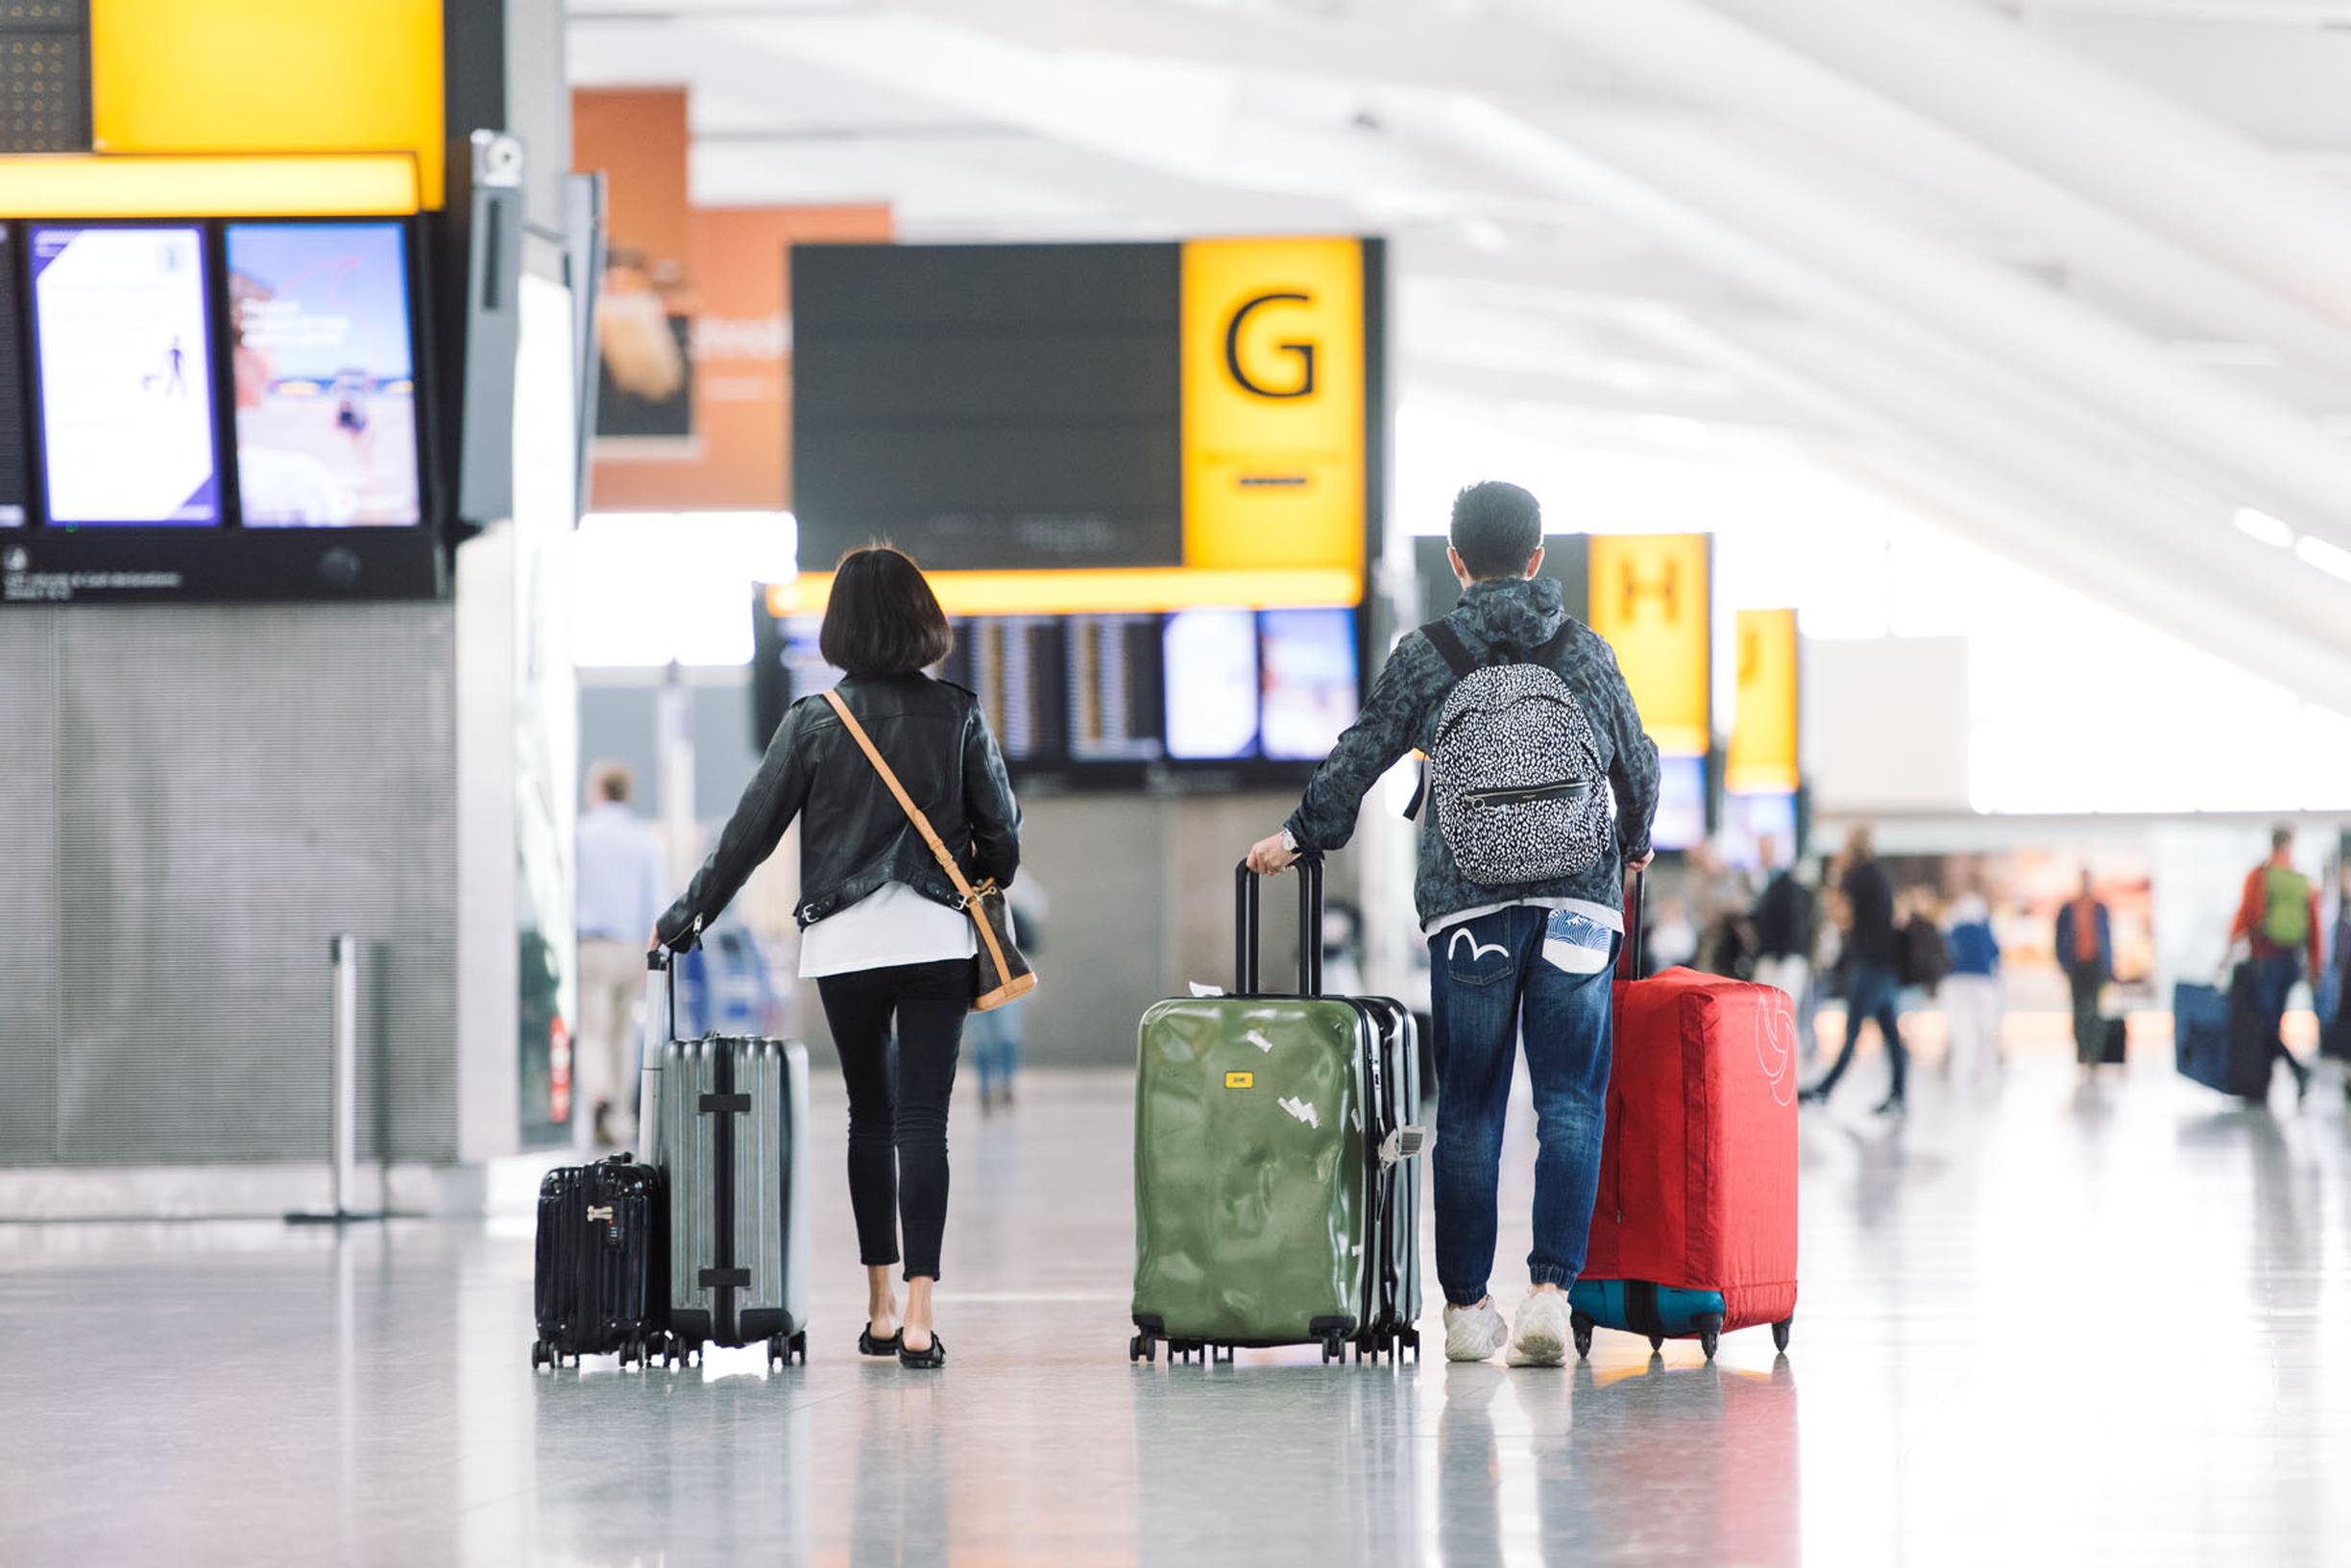 Heathrow Airport passenger numbers fell by 97% in April